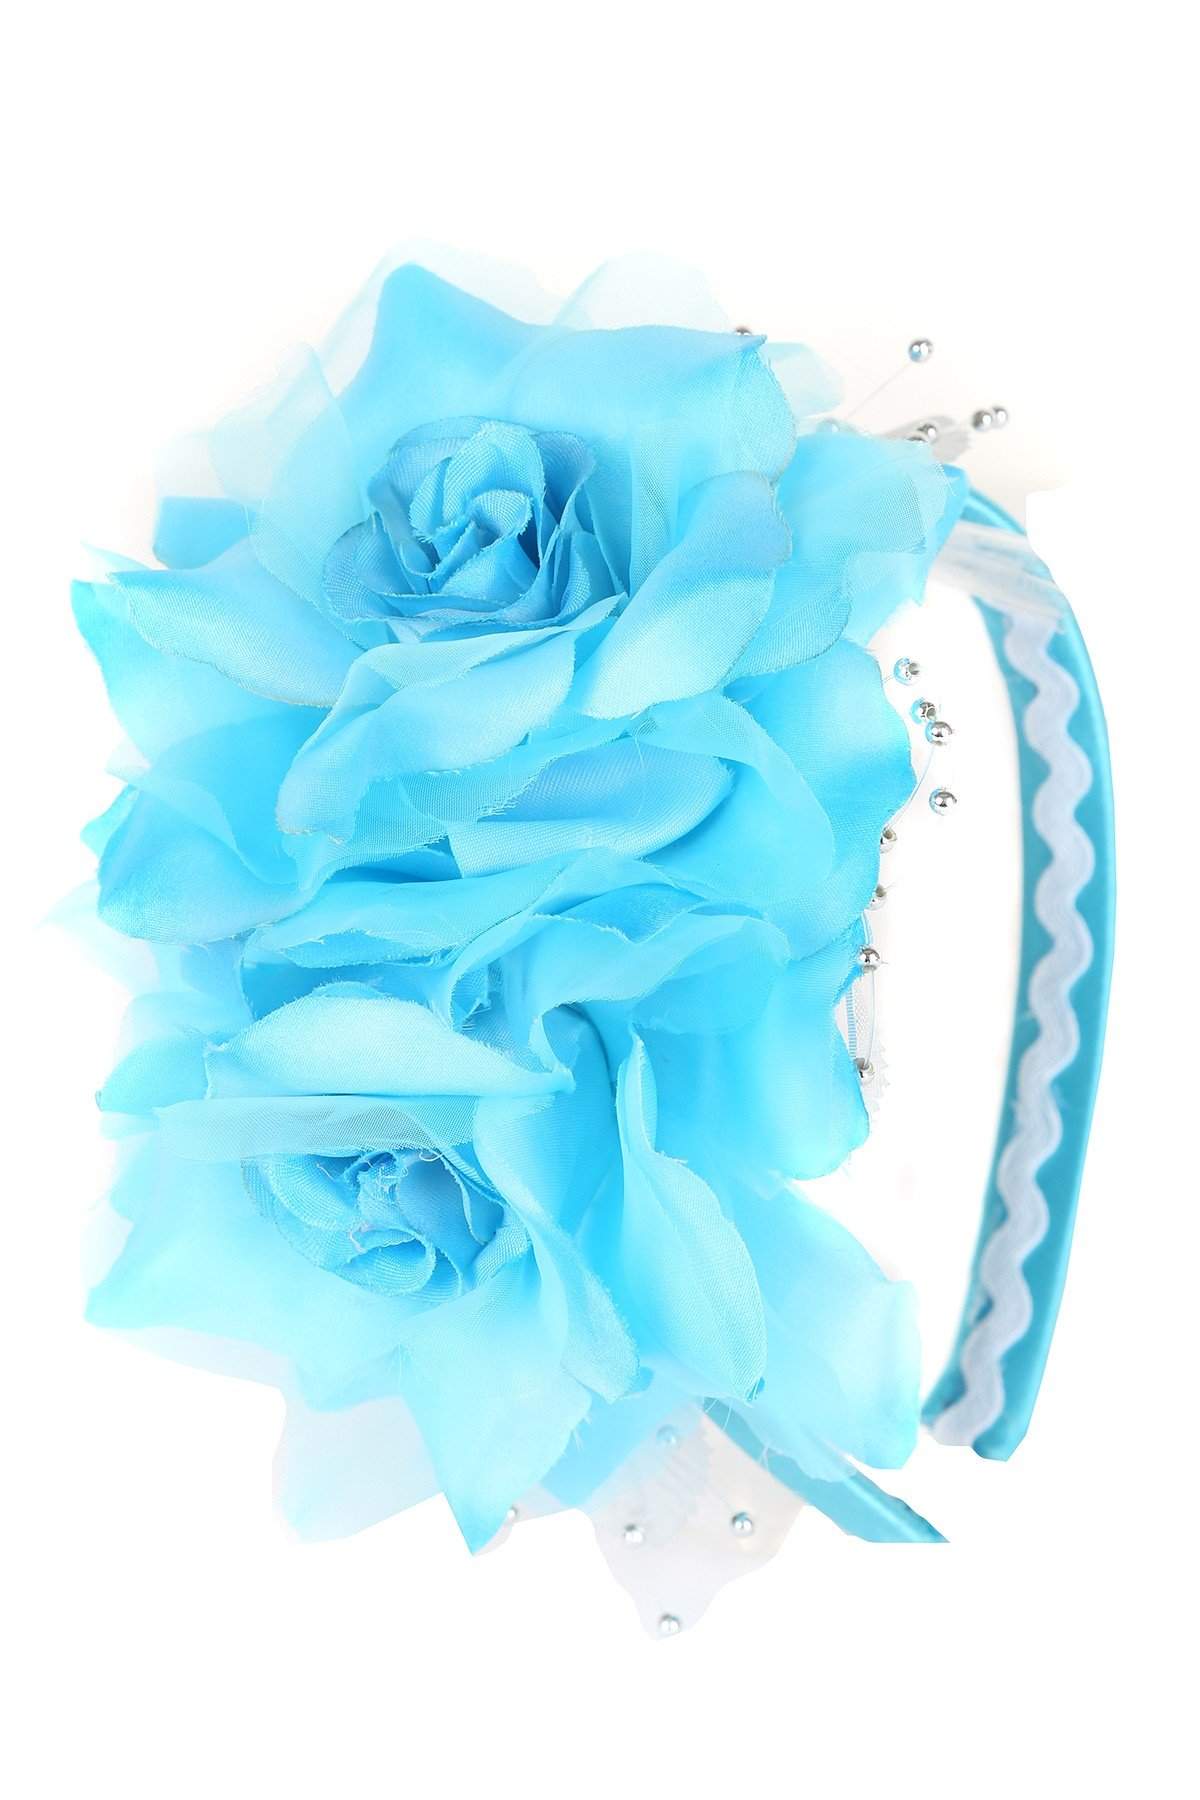 Large Flower Headband-Kid's Dream-1_2,3_4,5_6,7_8,big_girl,color_White,fabric_Satin,little_girl,size_02,size_04,size_06,size_08,size_10,size_12,size_14